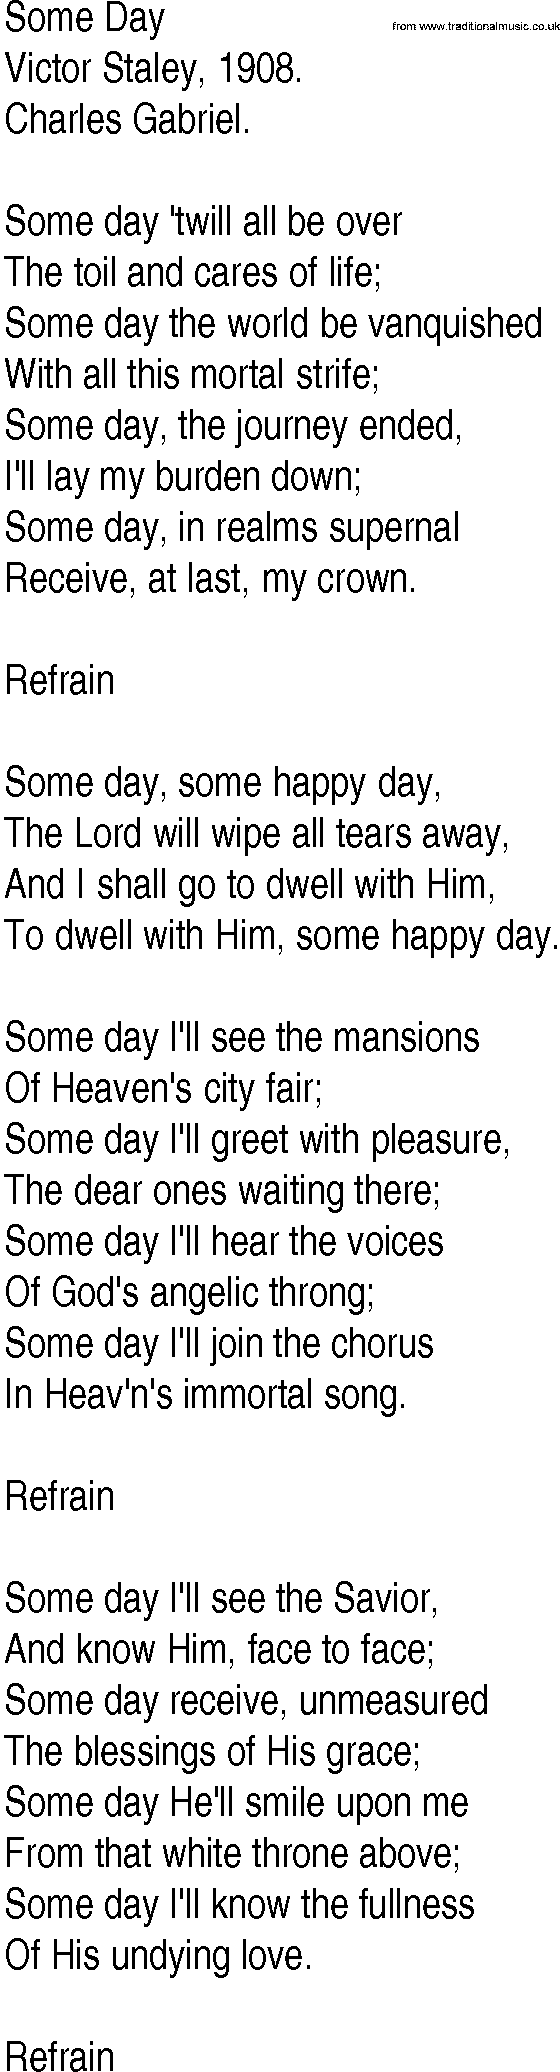 Hymn and Gospel Song: Some Day by Victor Staley lyrics